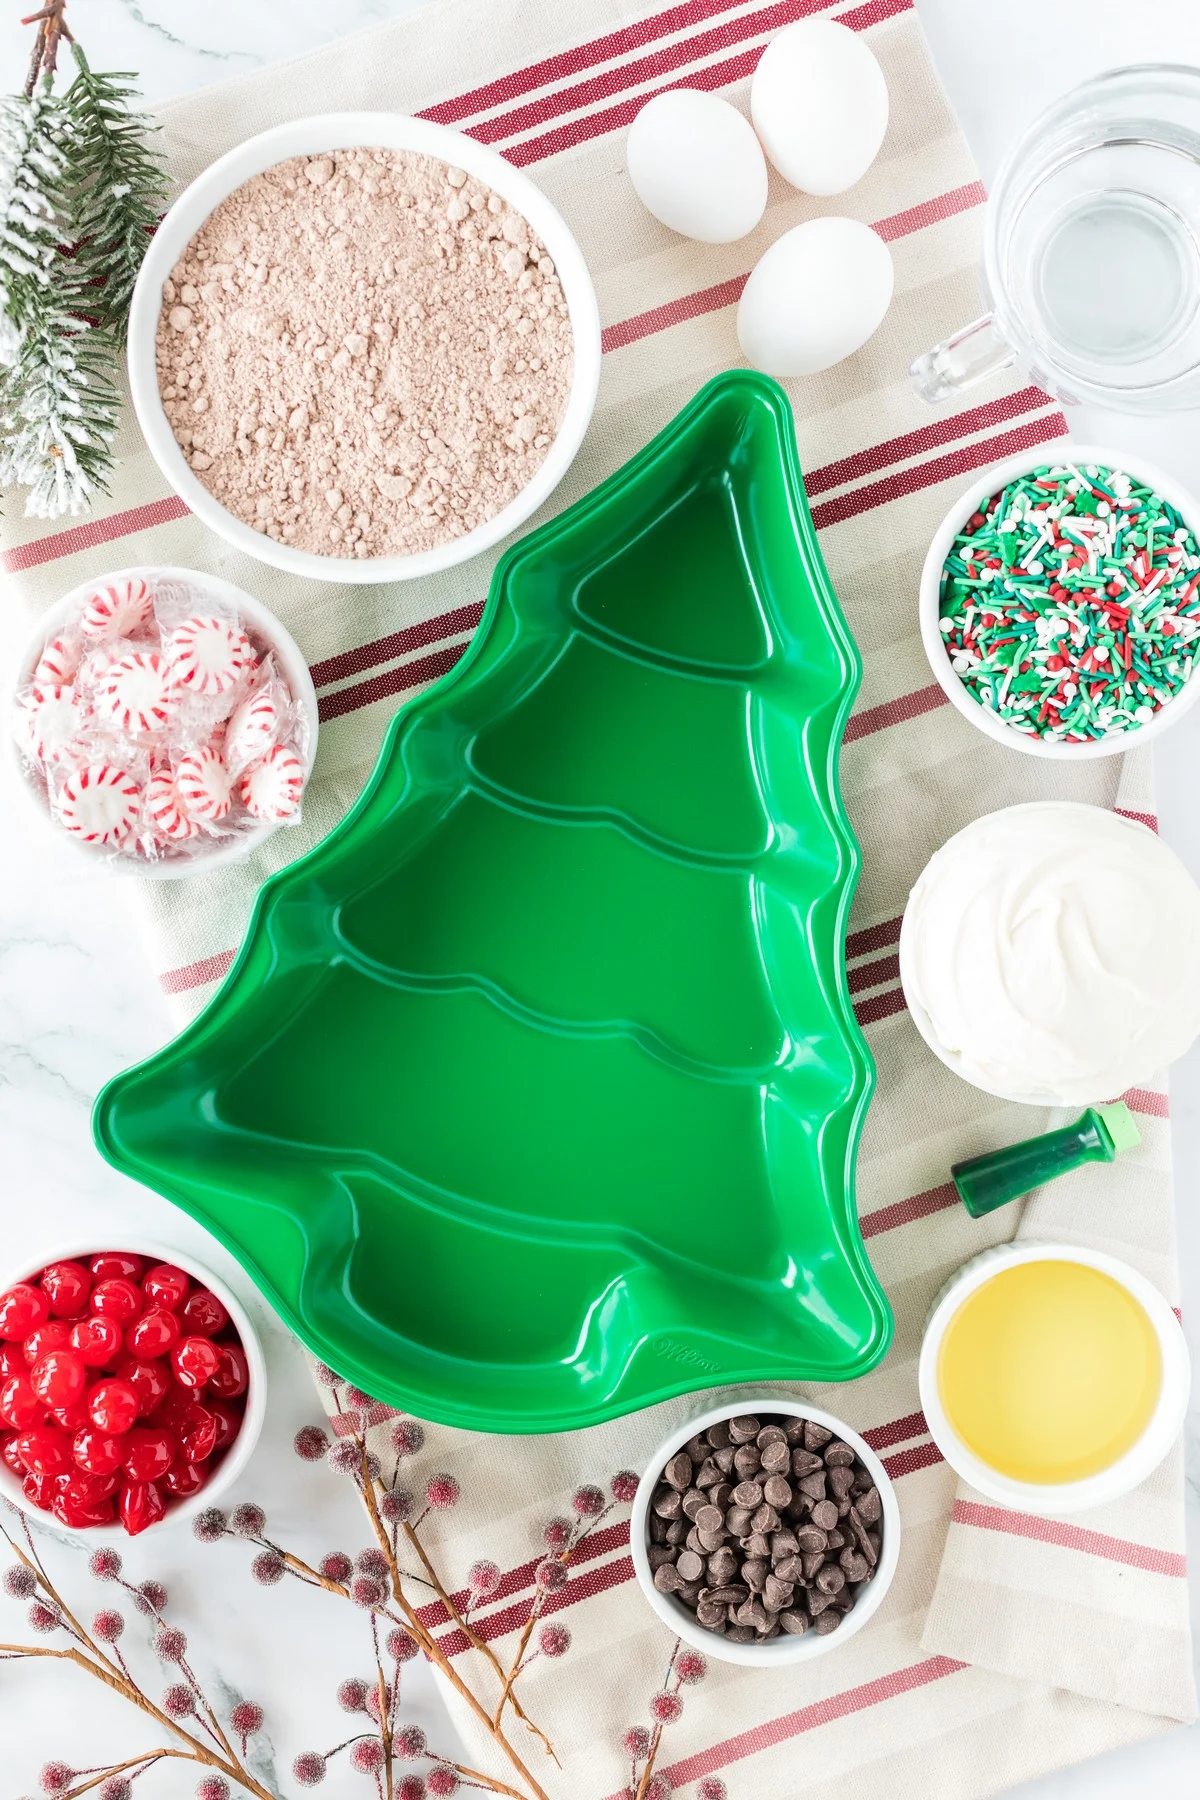 supplies and ingredients for christmas tree cake